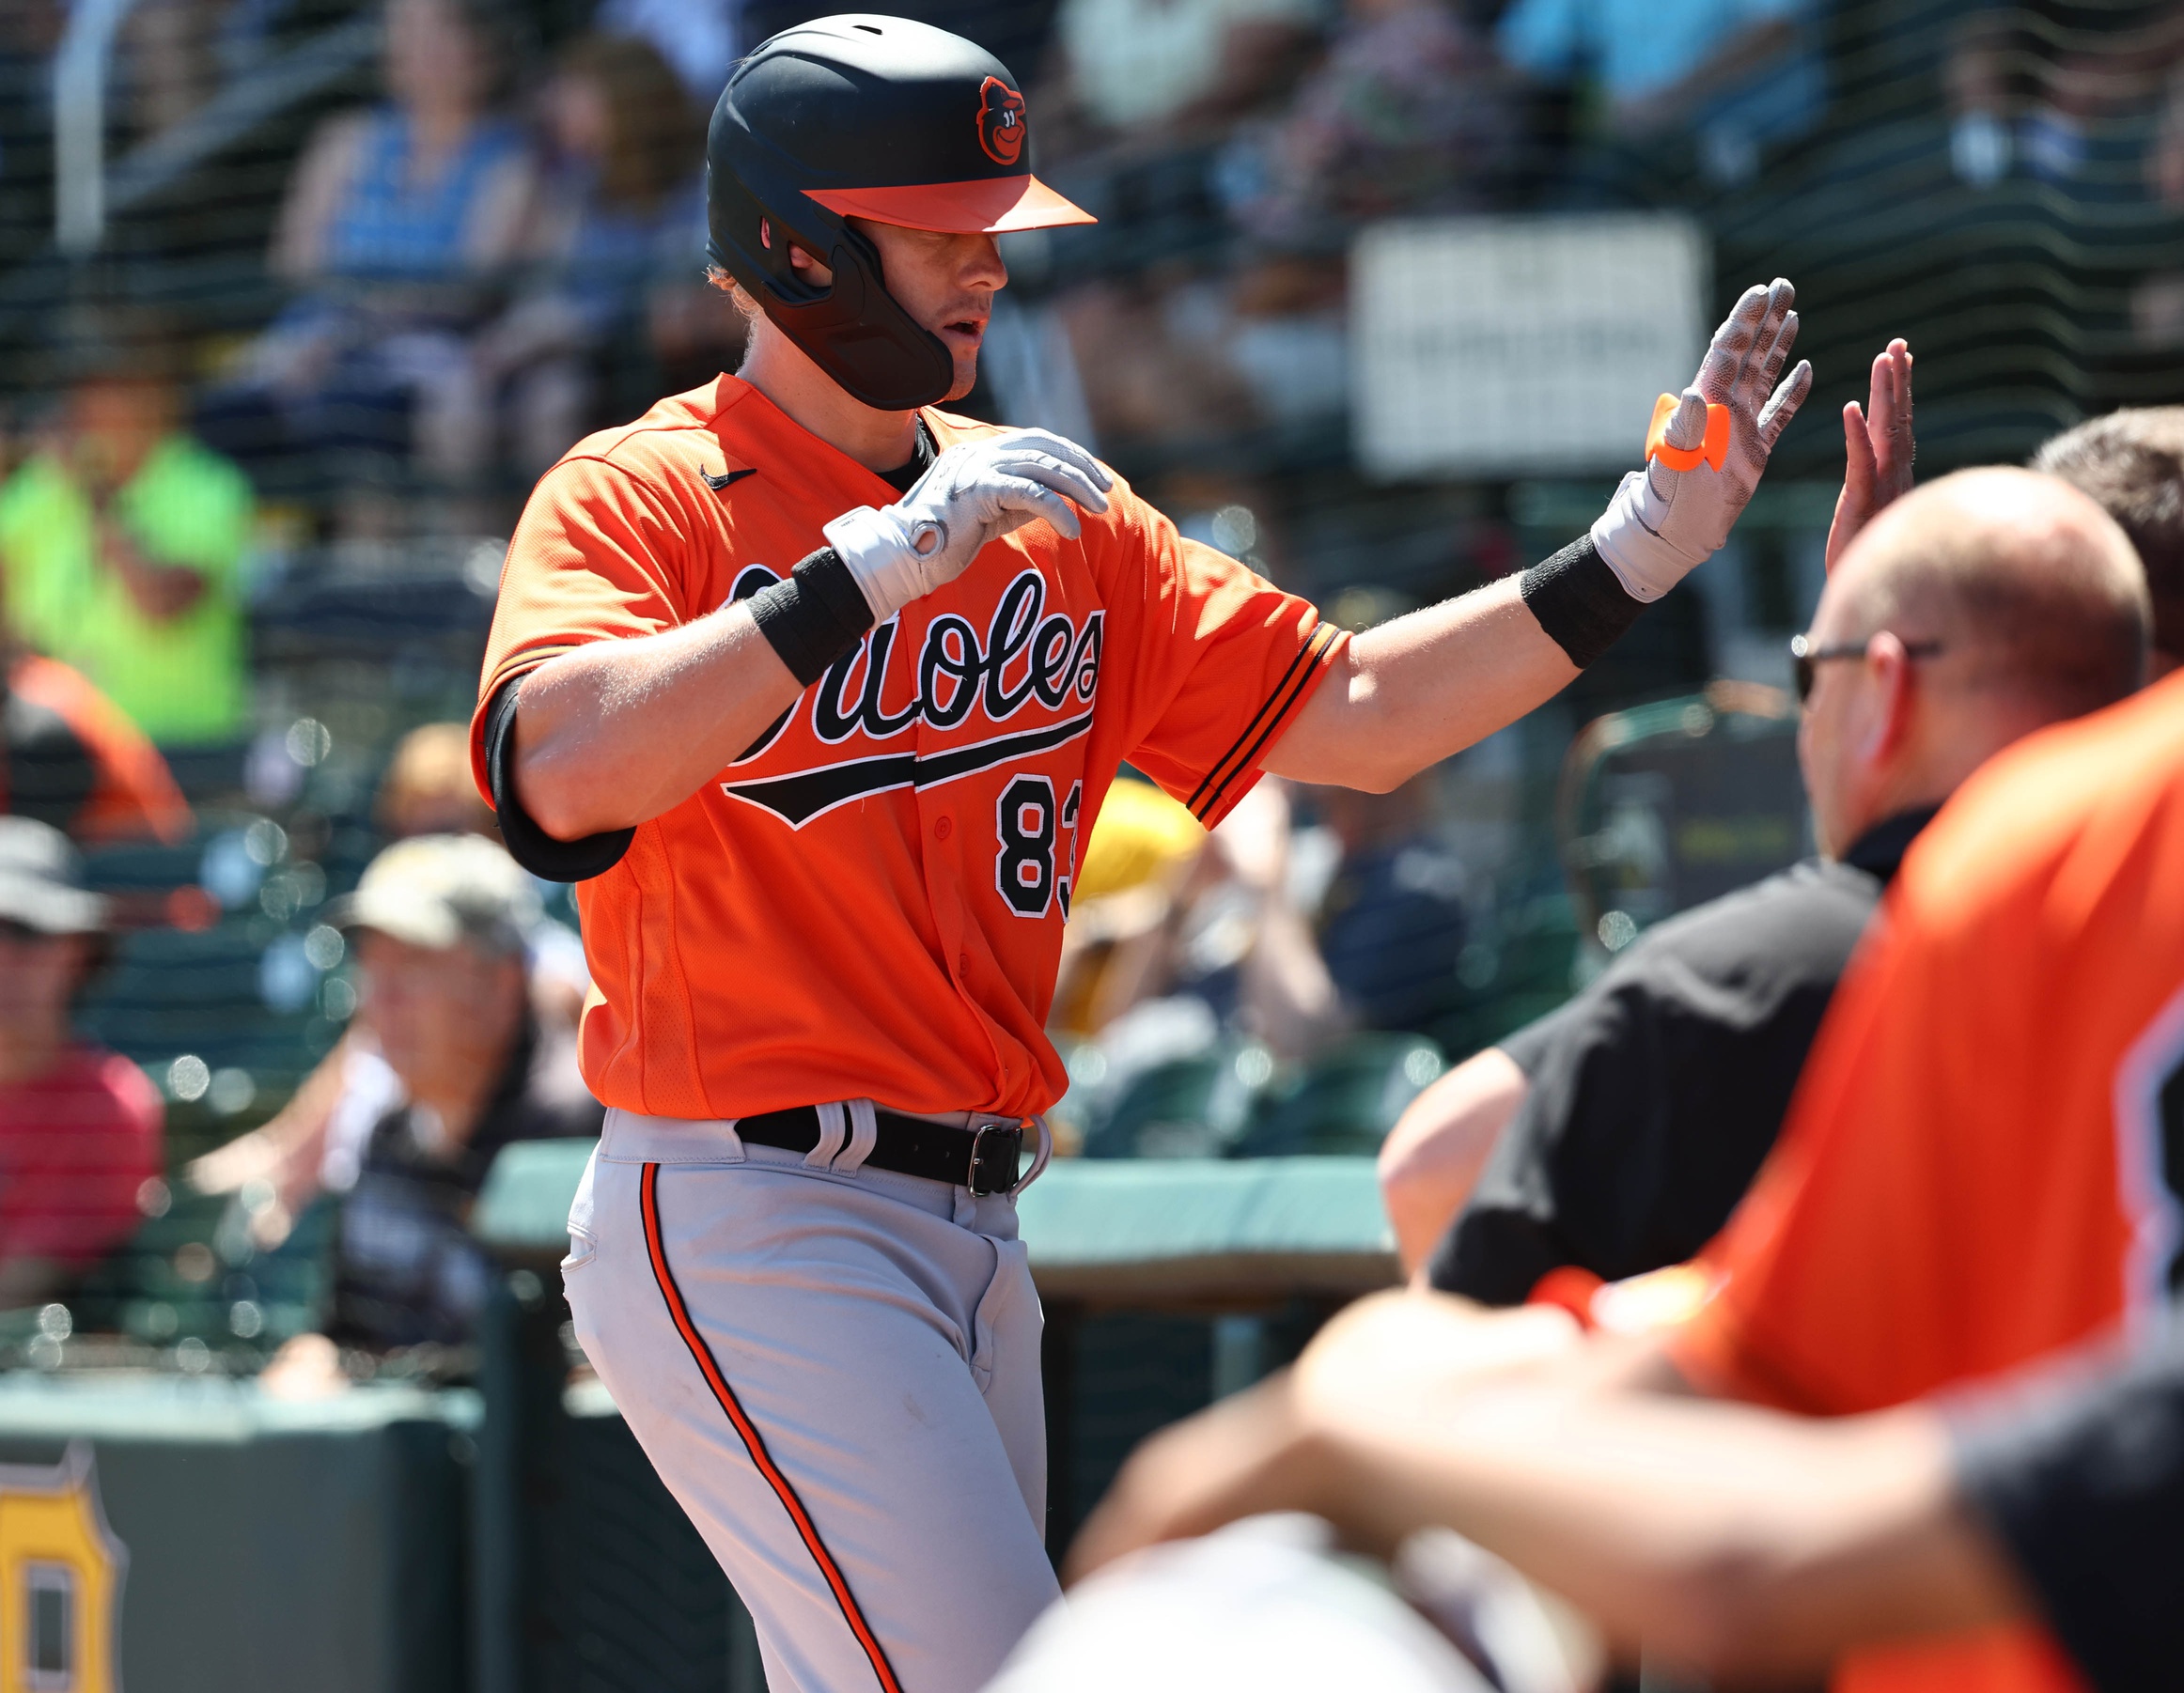 Baltimore Orioles Series Preview: The best farm system in baseball